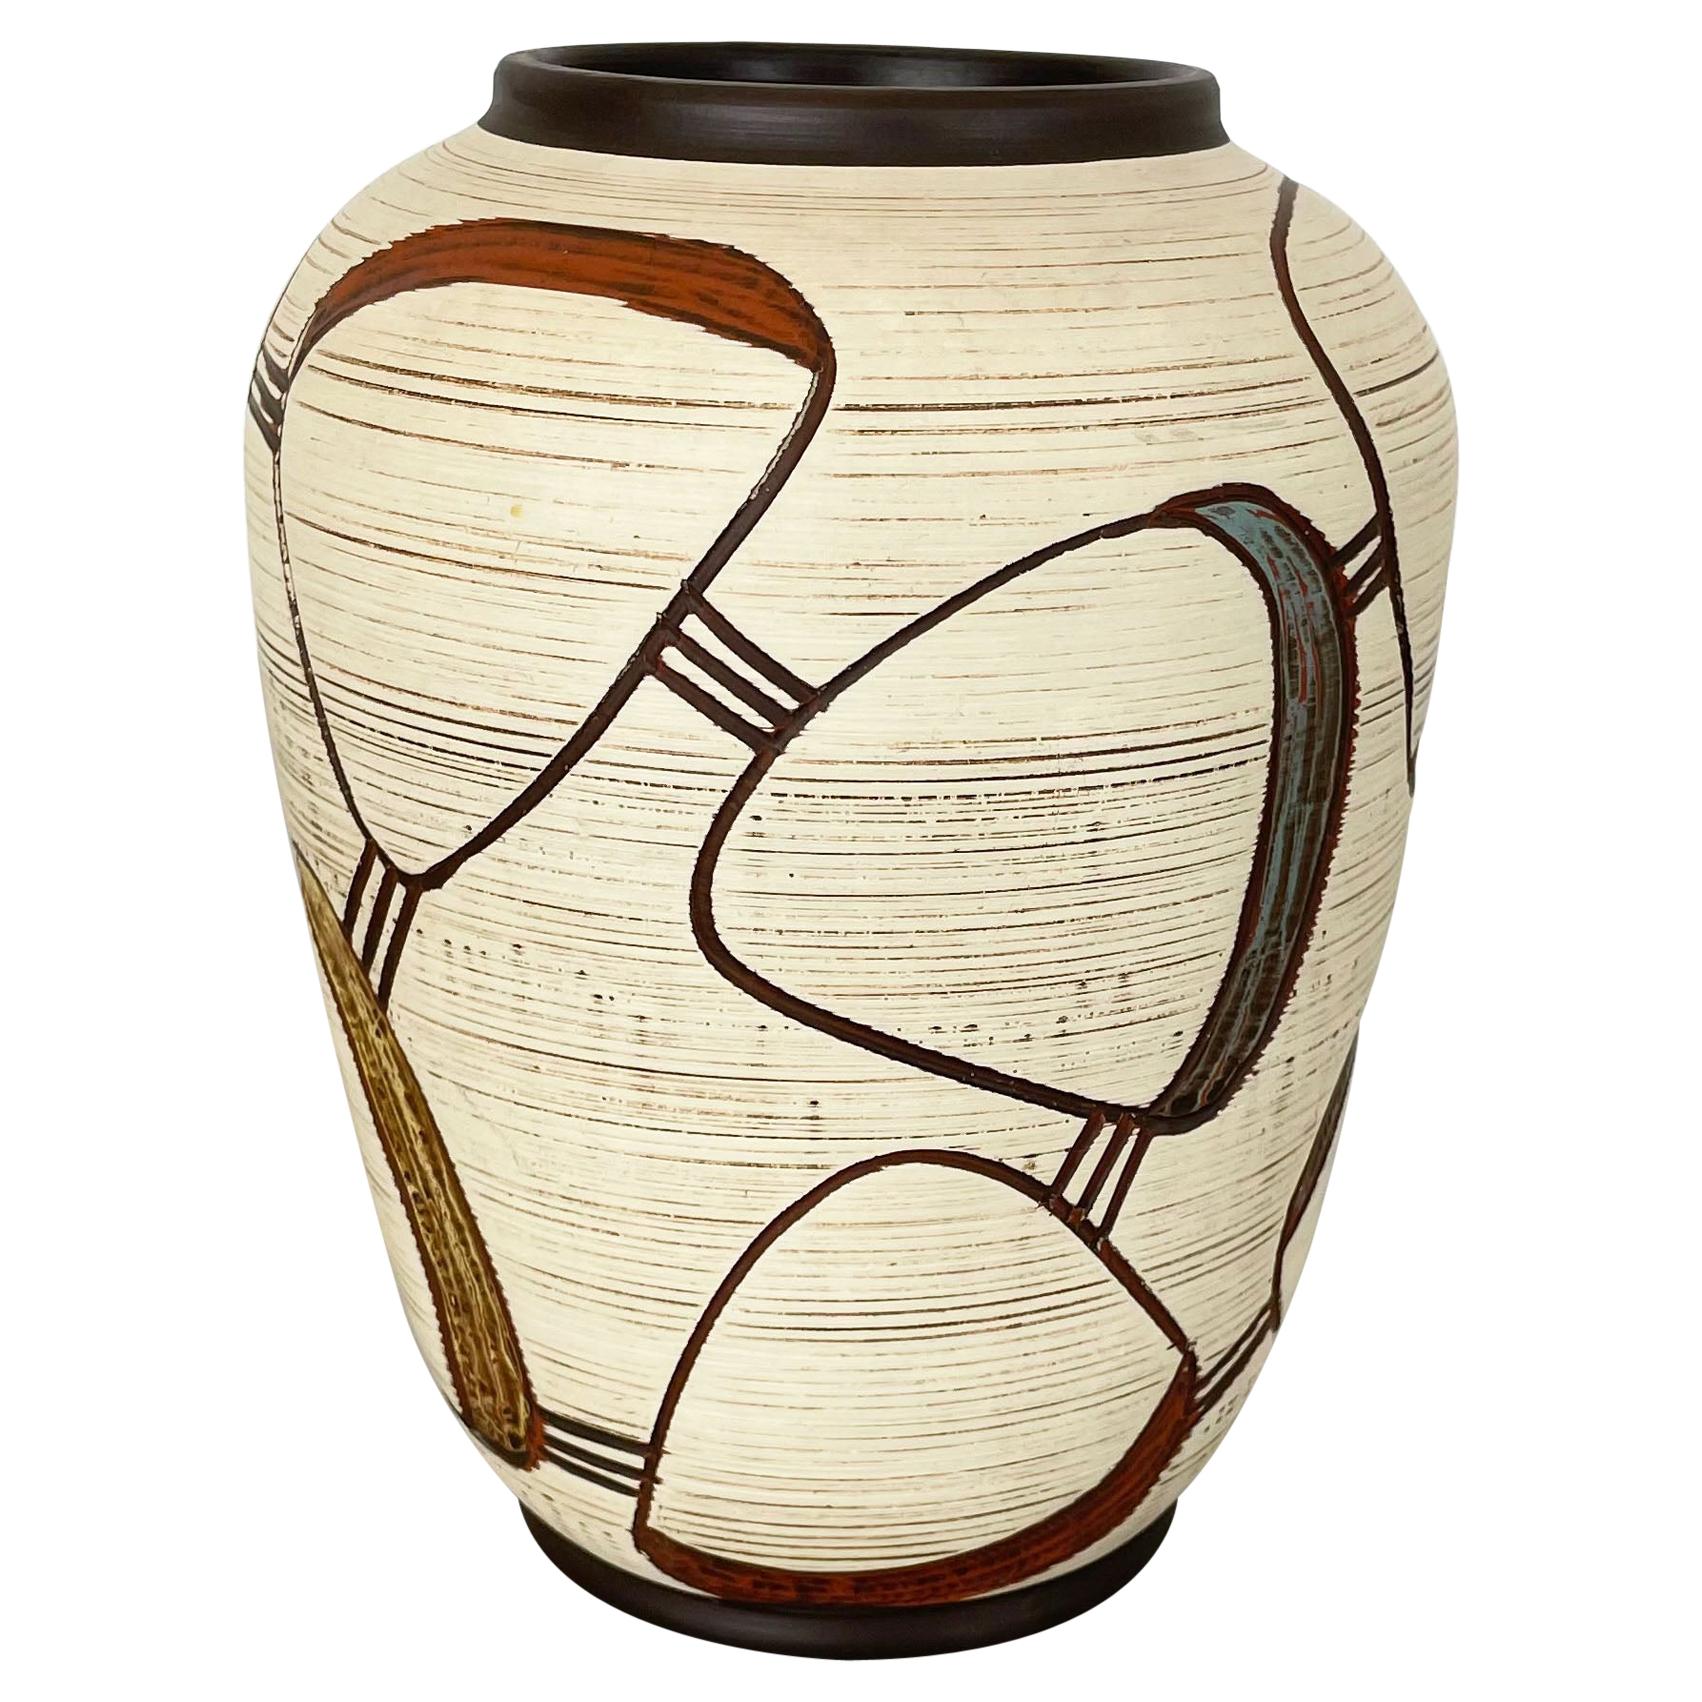 Colorful Abstract Ceramic Pottery Vase by Sawa Franz Schwaderlapp, Germany 1950s For Sale